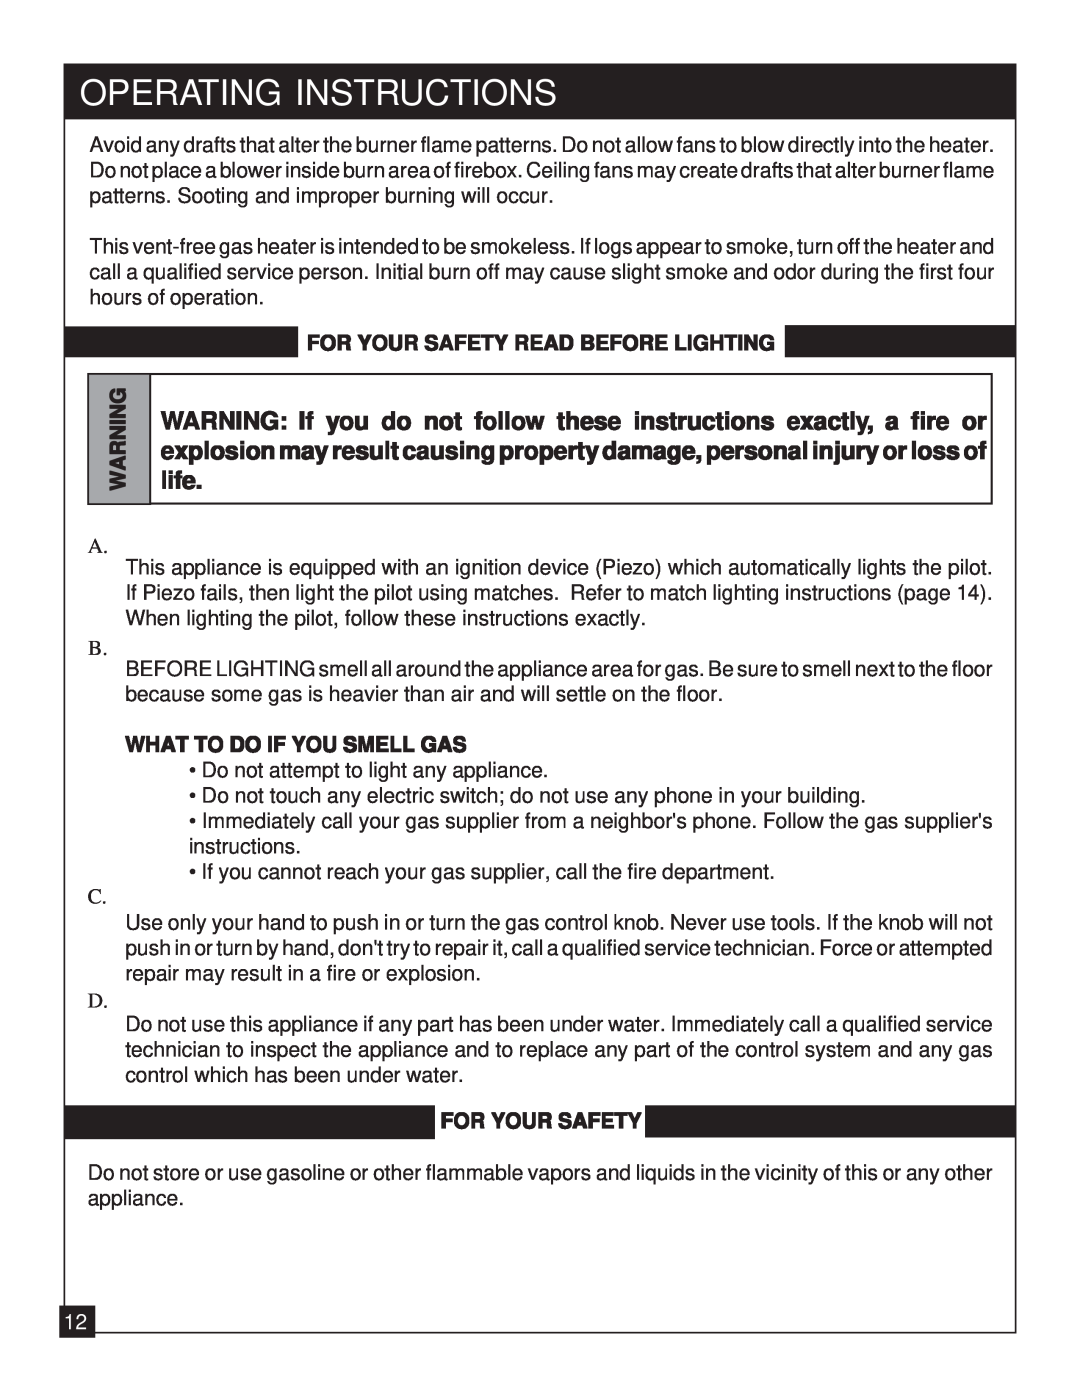 United States Stove 9947 Operating Instructions, For Your Safety Read Before Lighting, What To Do If You Smell Gas 